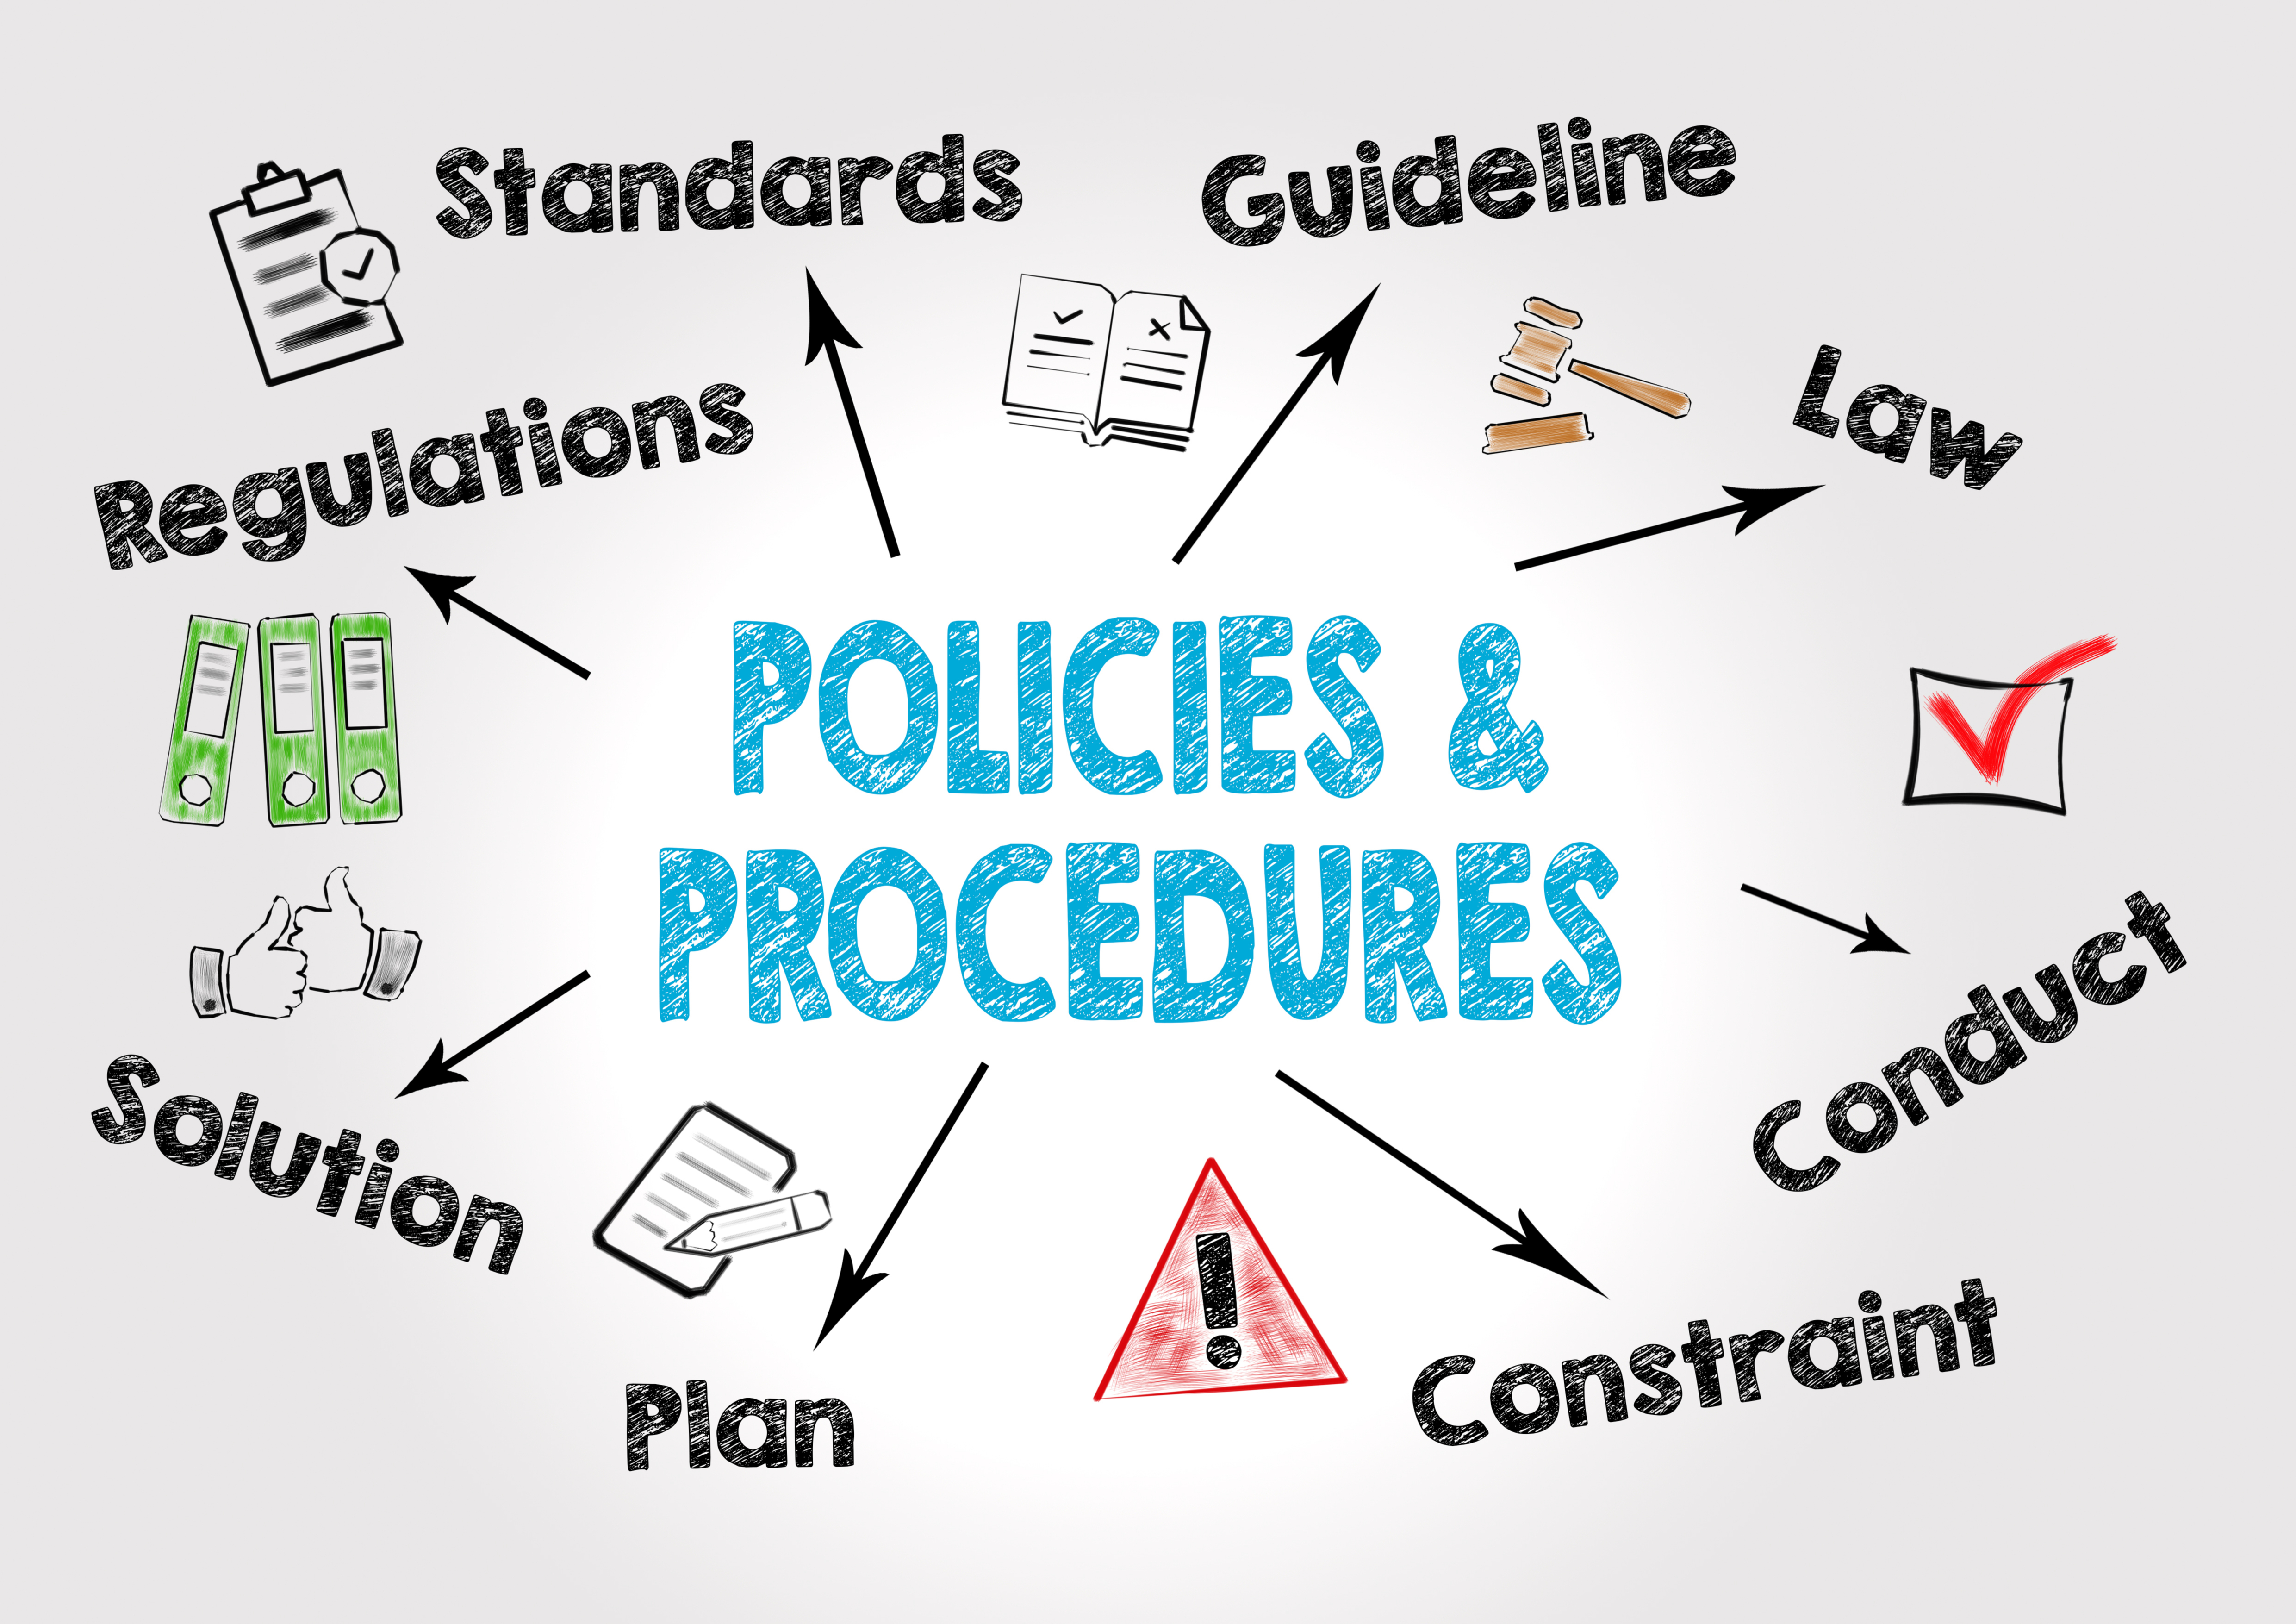 policies and procedures - regulations - standards - guideline - law - solution - plan - constraint - conduct